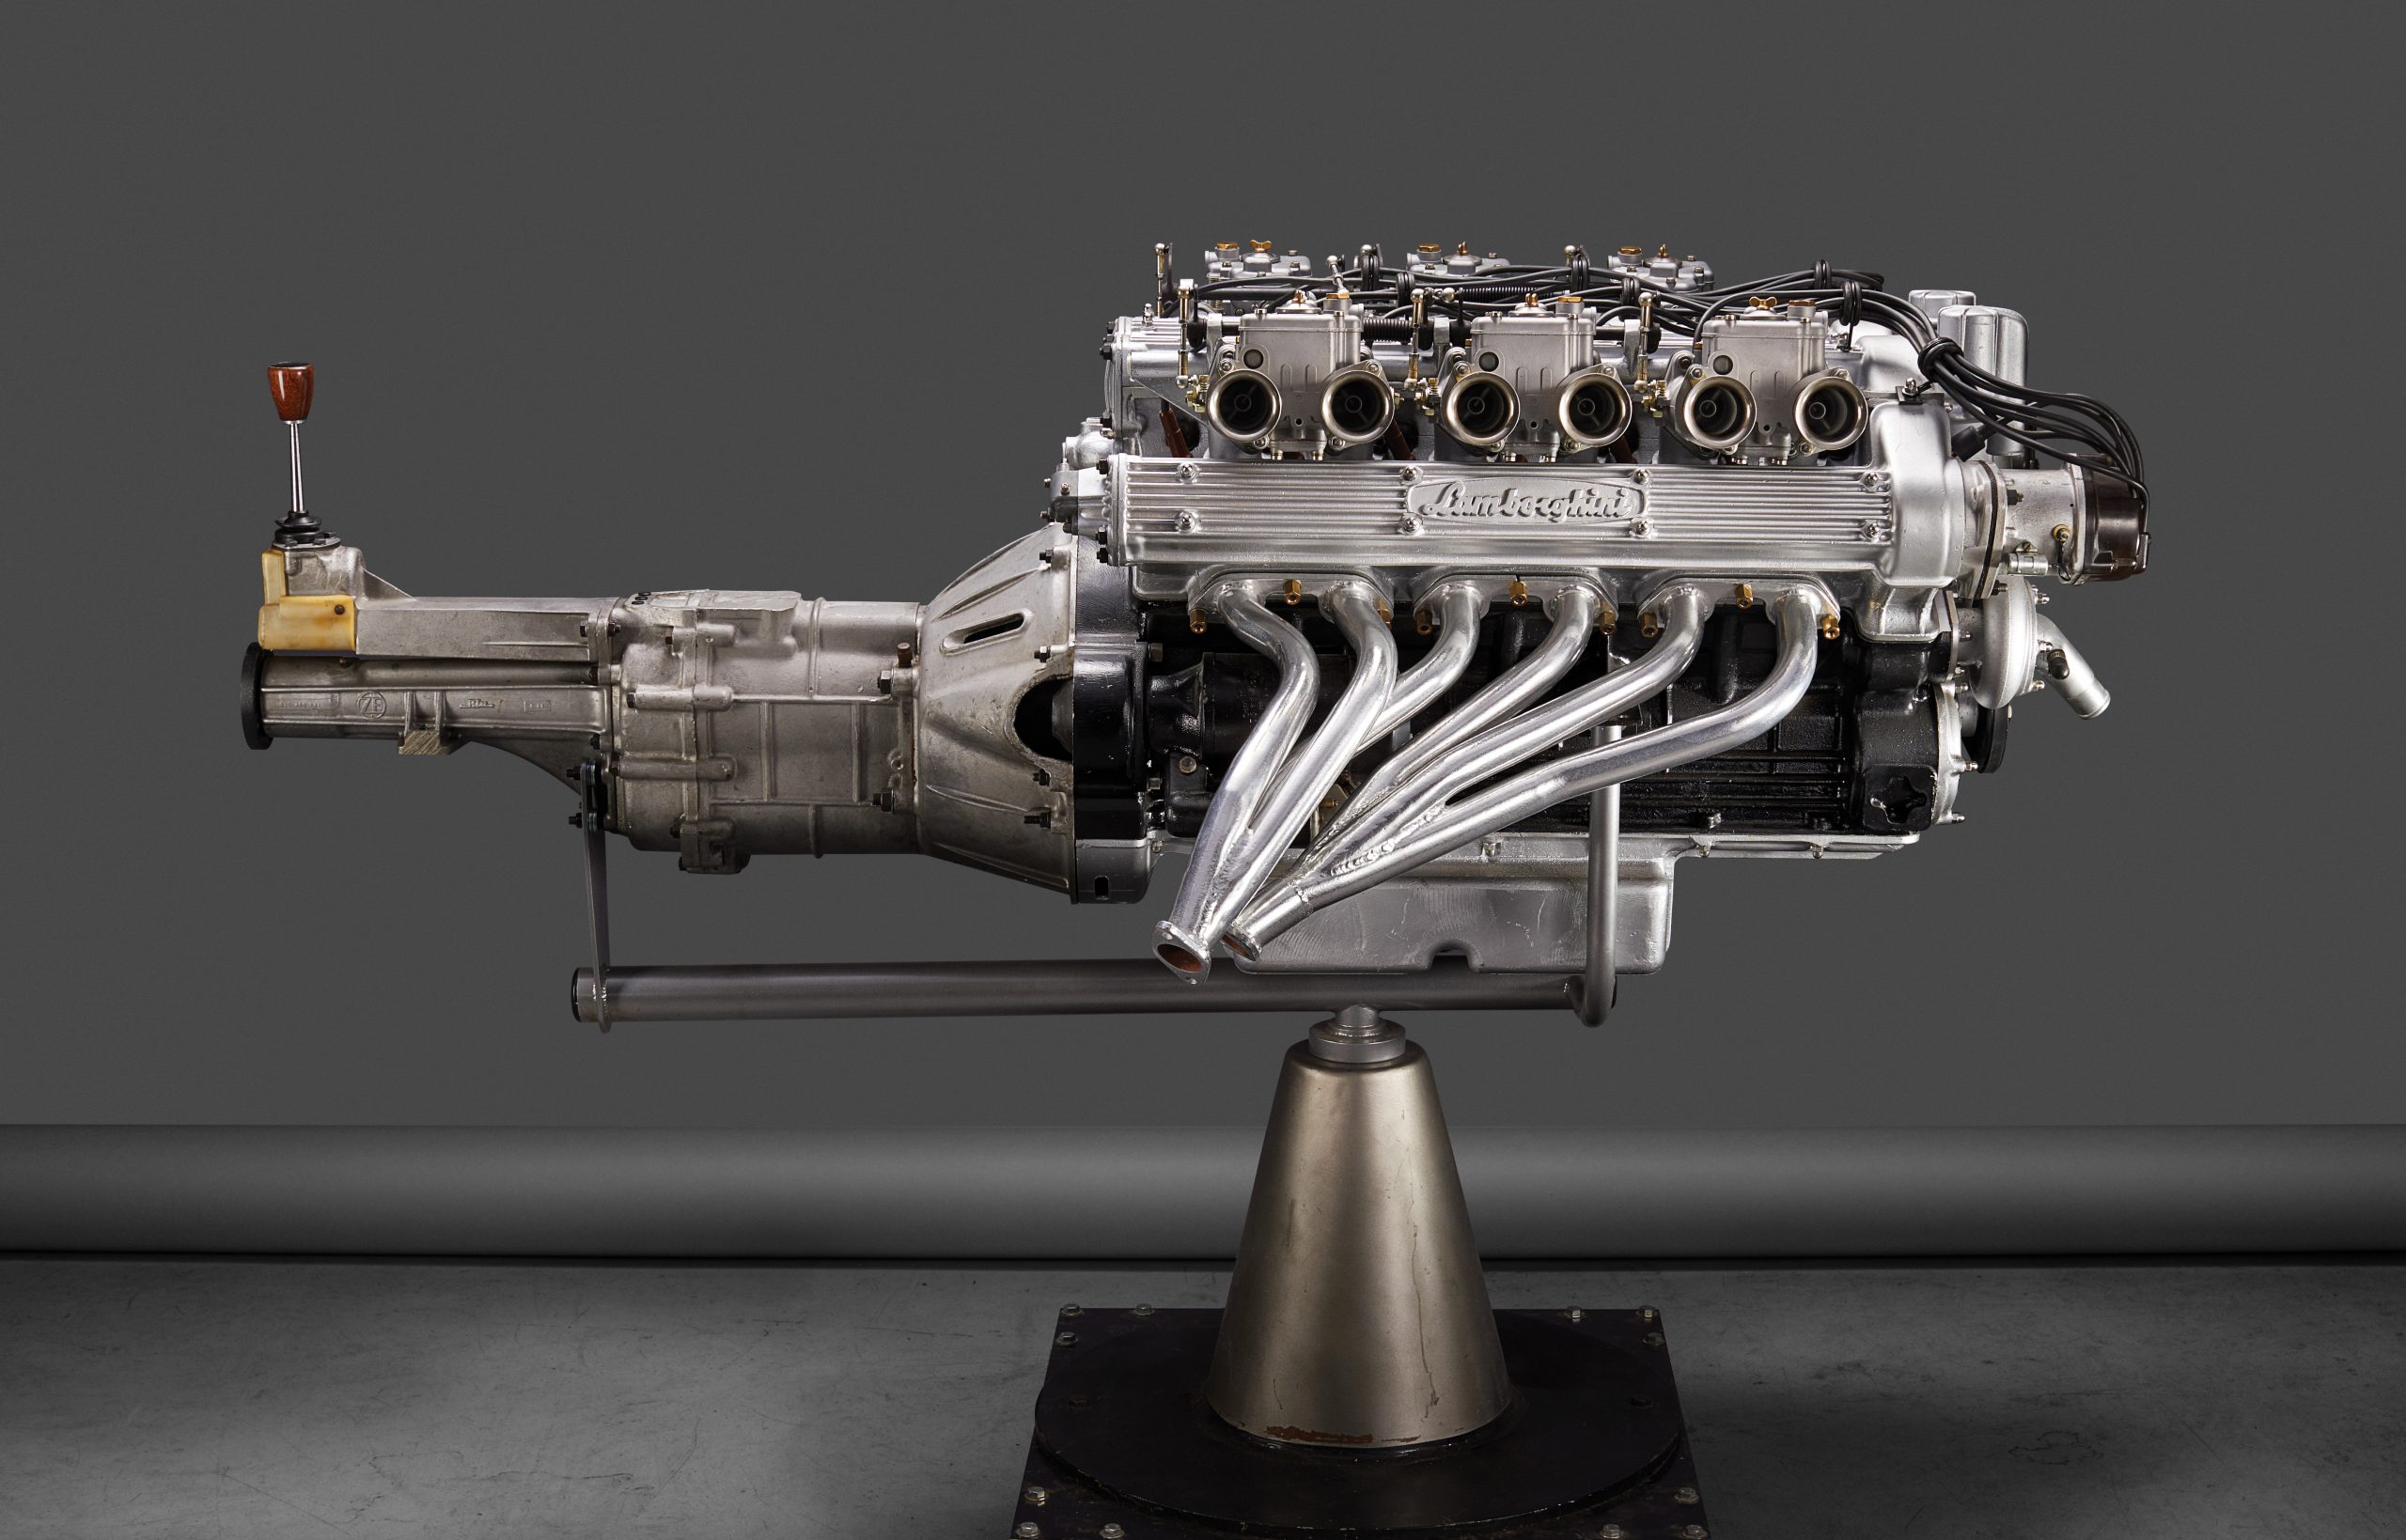 Lamborghini’s first V12 lived large for 48 years